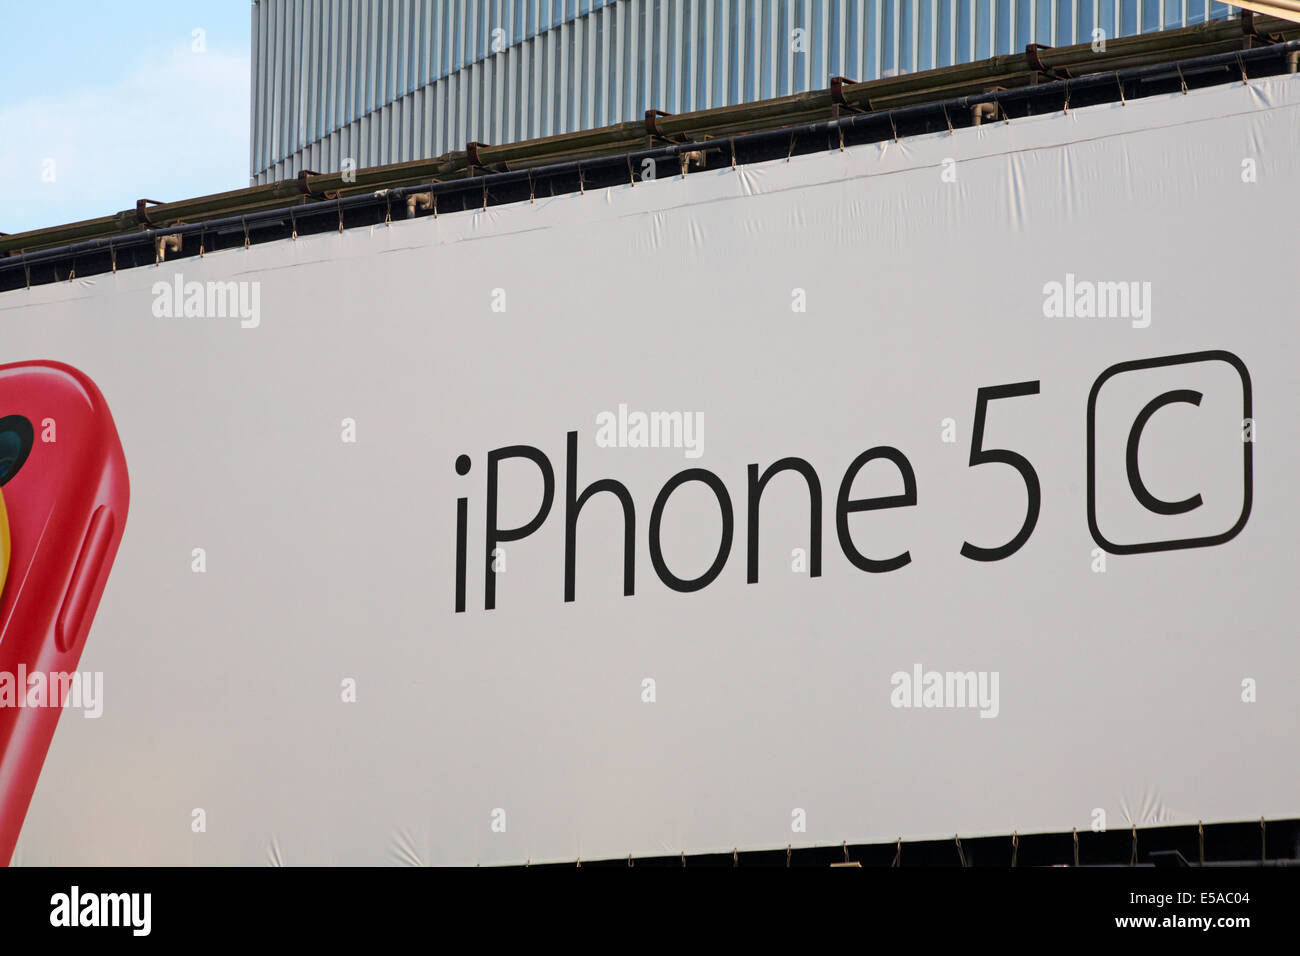 iPhone 5C iphone5C detail on billboard at London UK in July Stock Photo